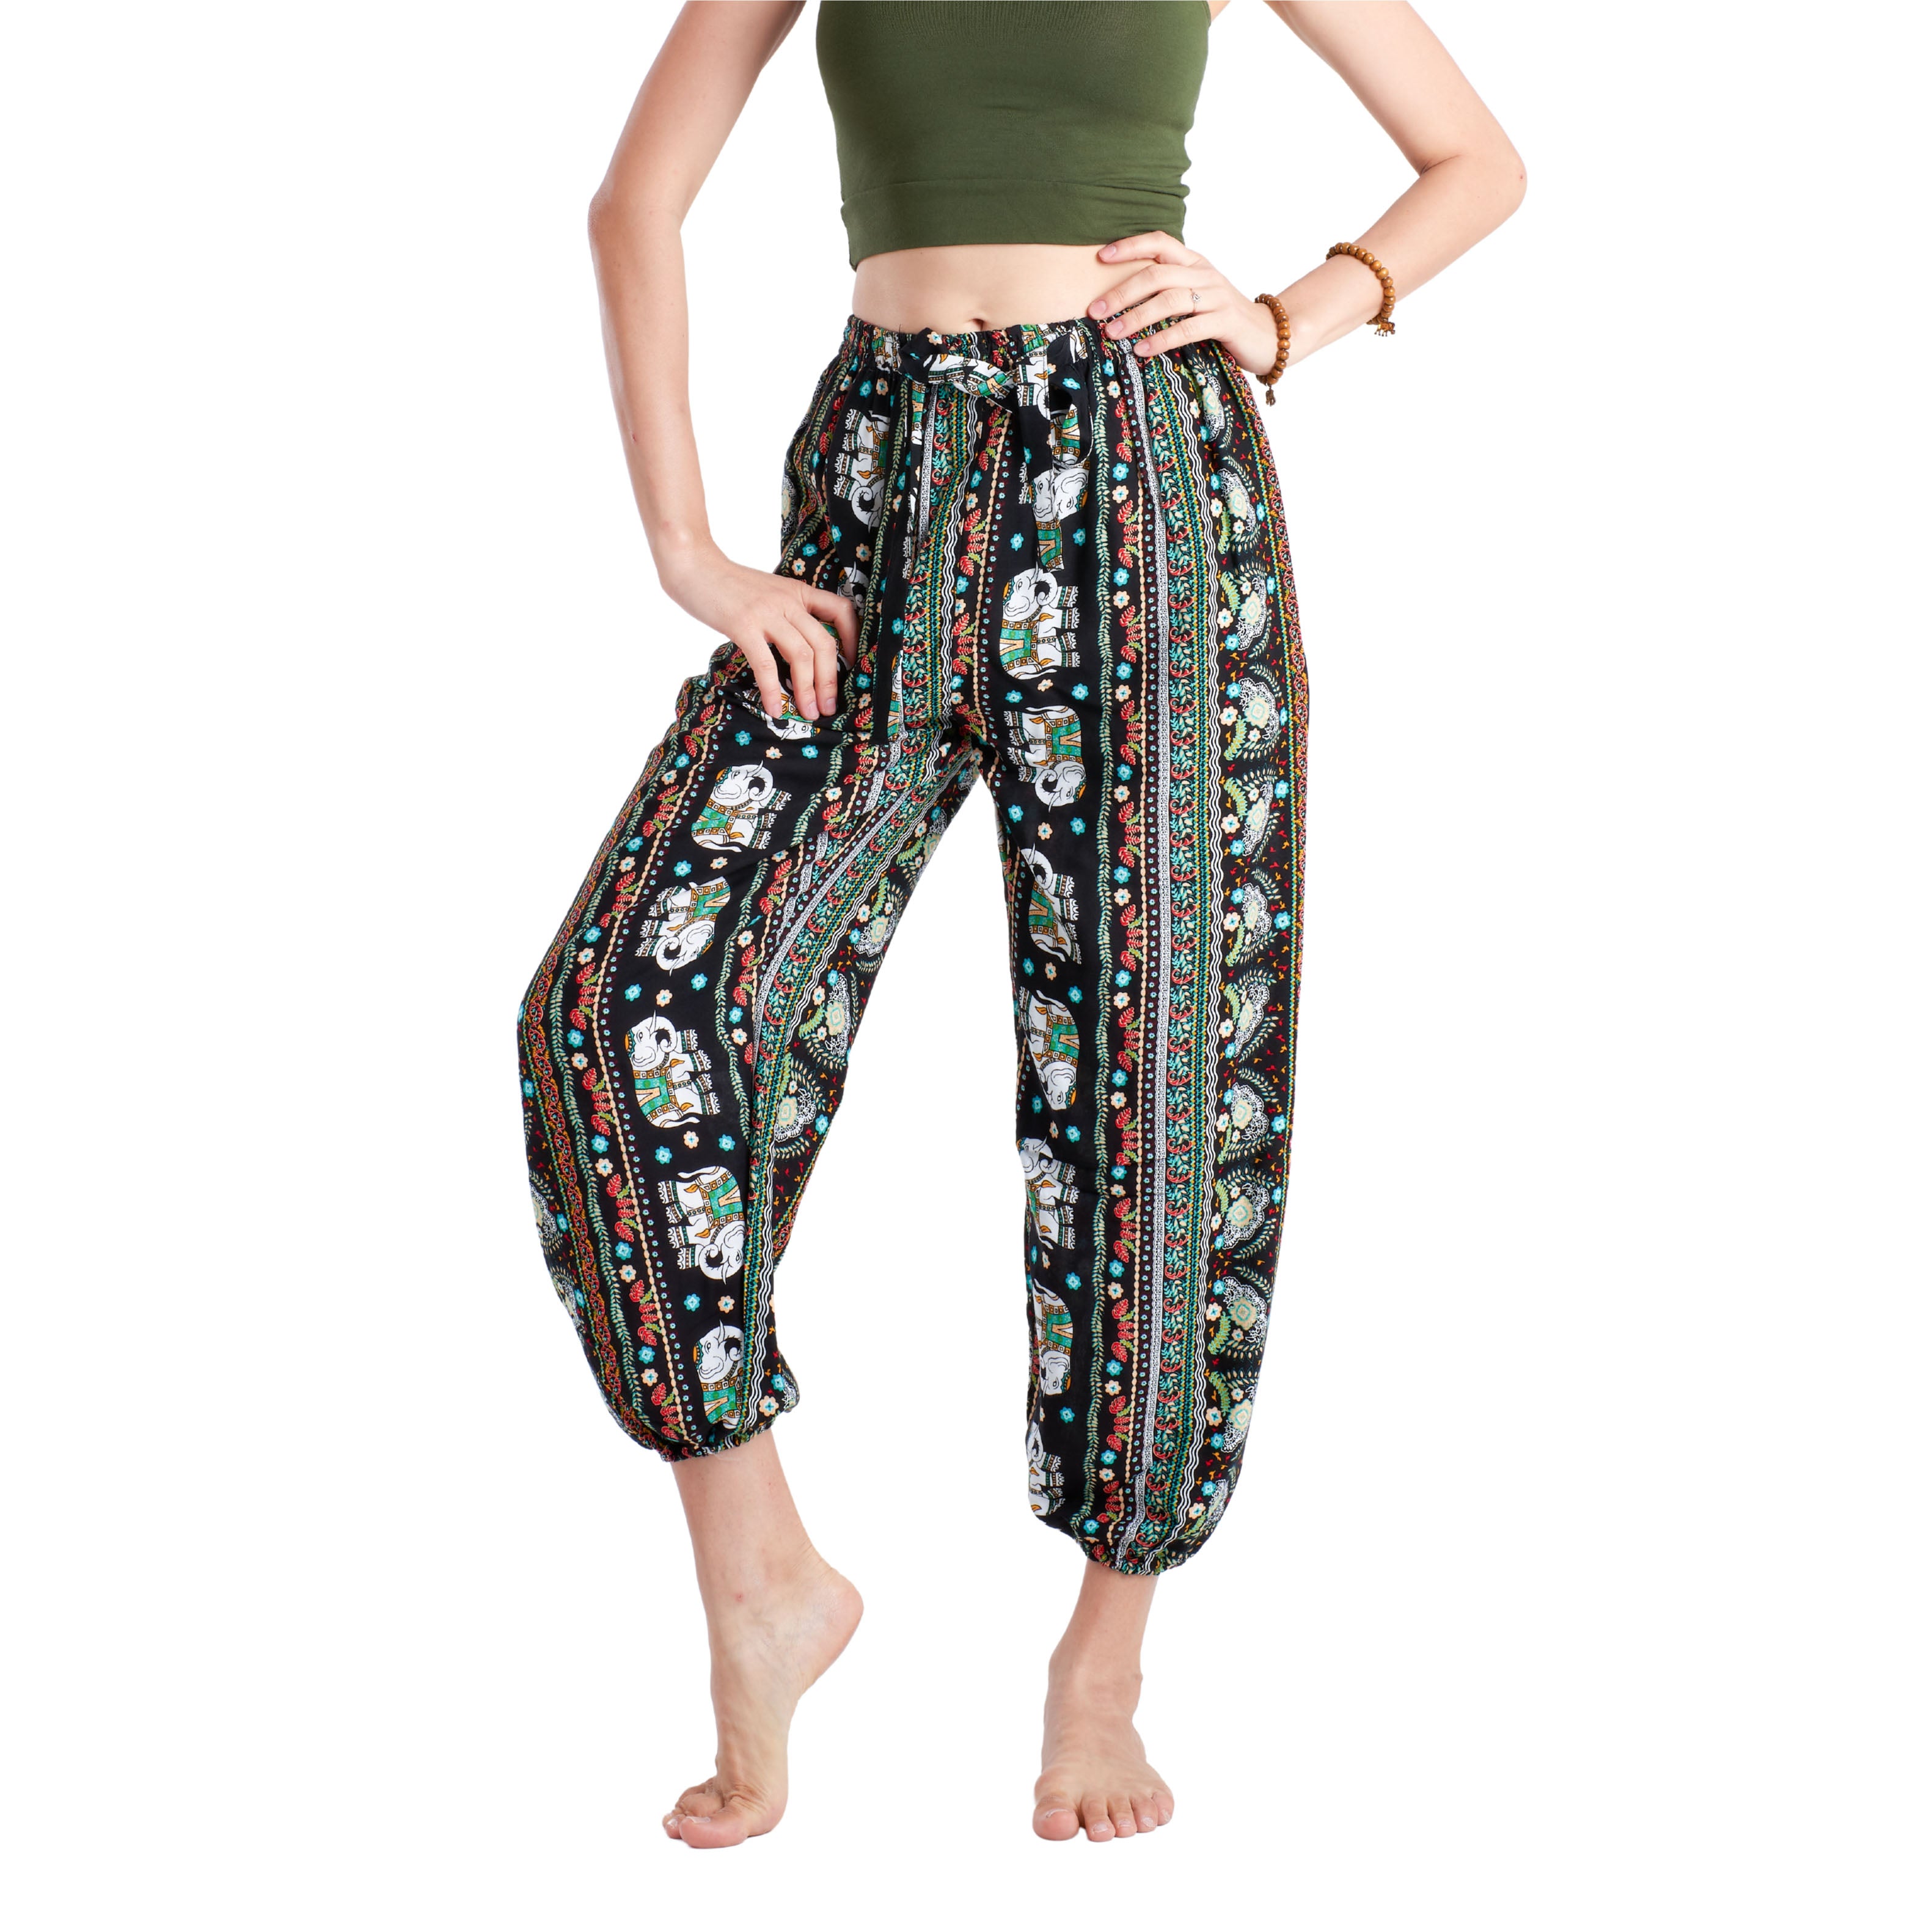 NOMADE PANTS - Drawstring Elepanta Drawstring Pants - Buy Today Elephant Pants Jewelry And Bohemian Clothes Handmade In Thailand Help To Save The Elephants FairTrade And Vegan